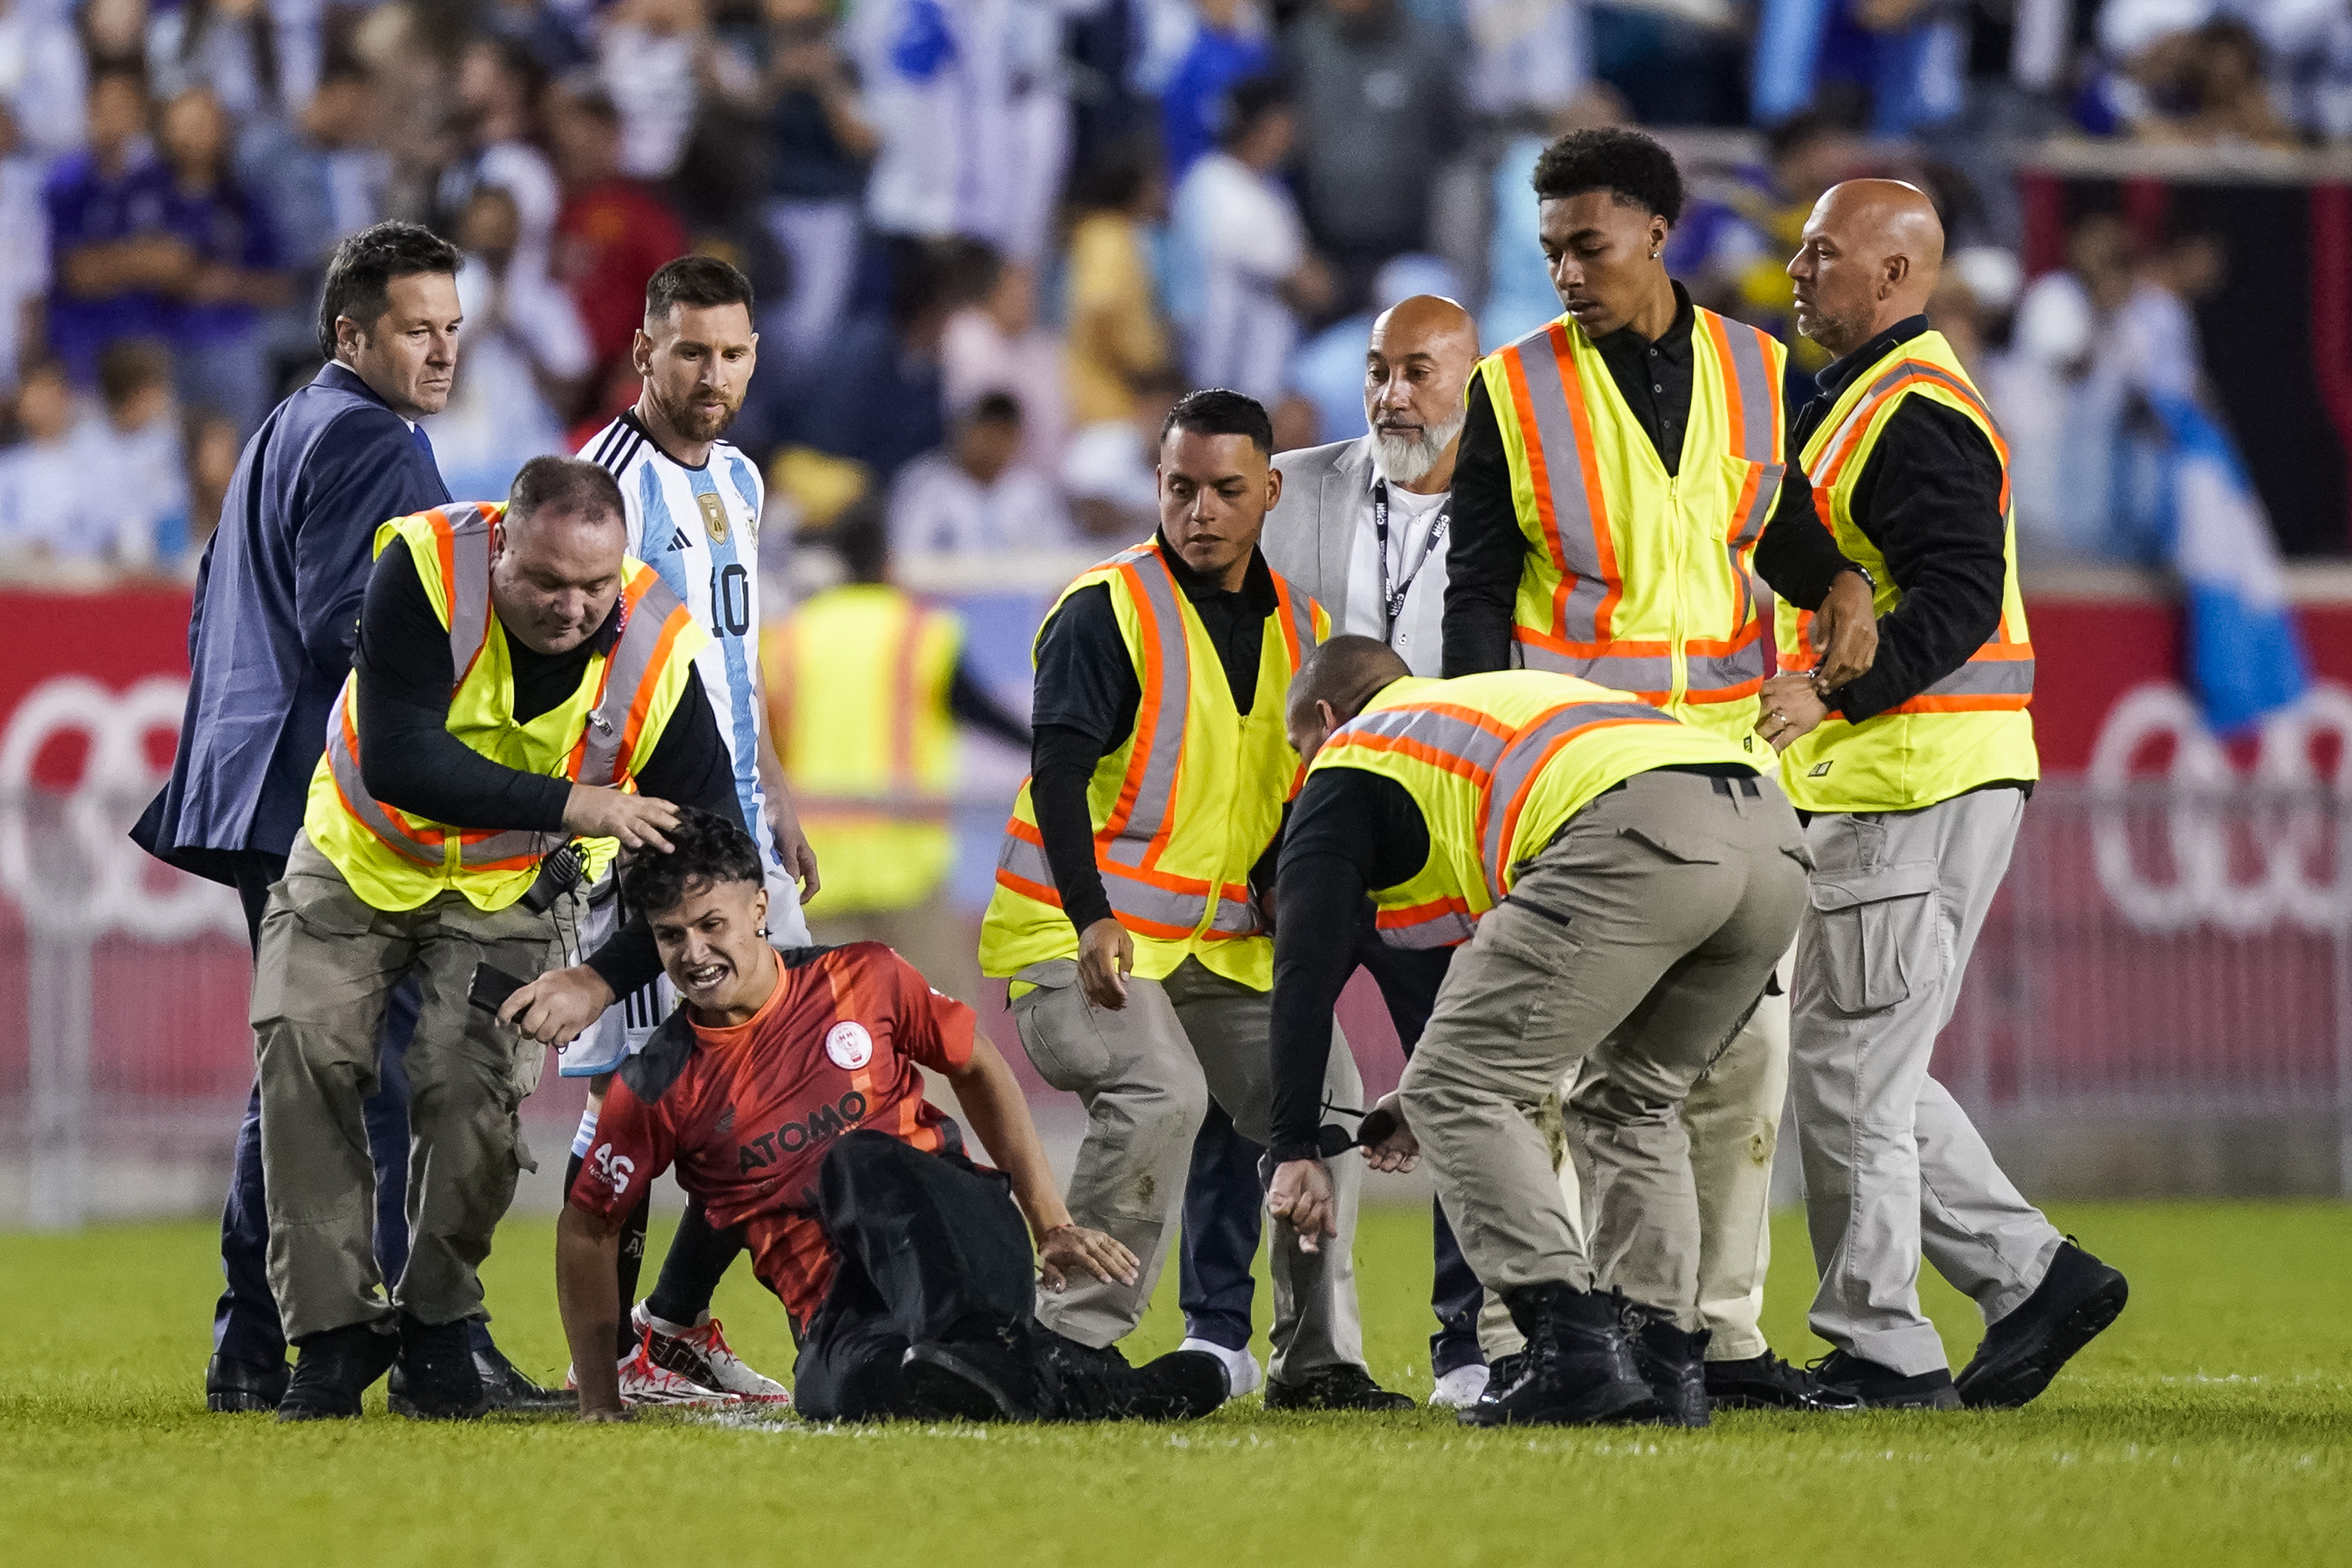 A fan is tackled as he tries to take a picture of Argentina's Lionel Messi.